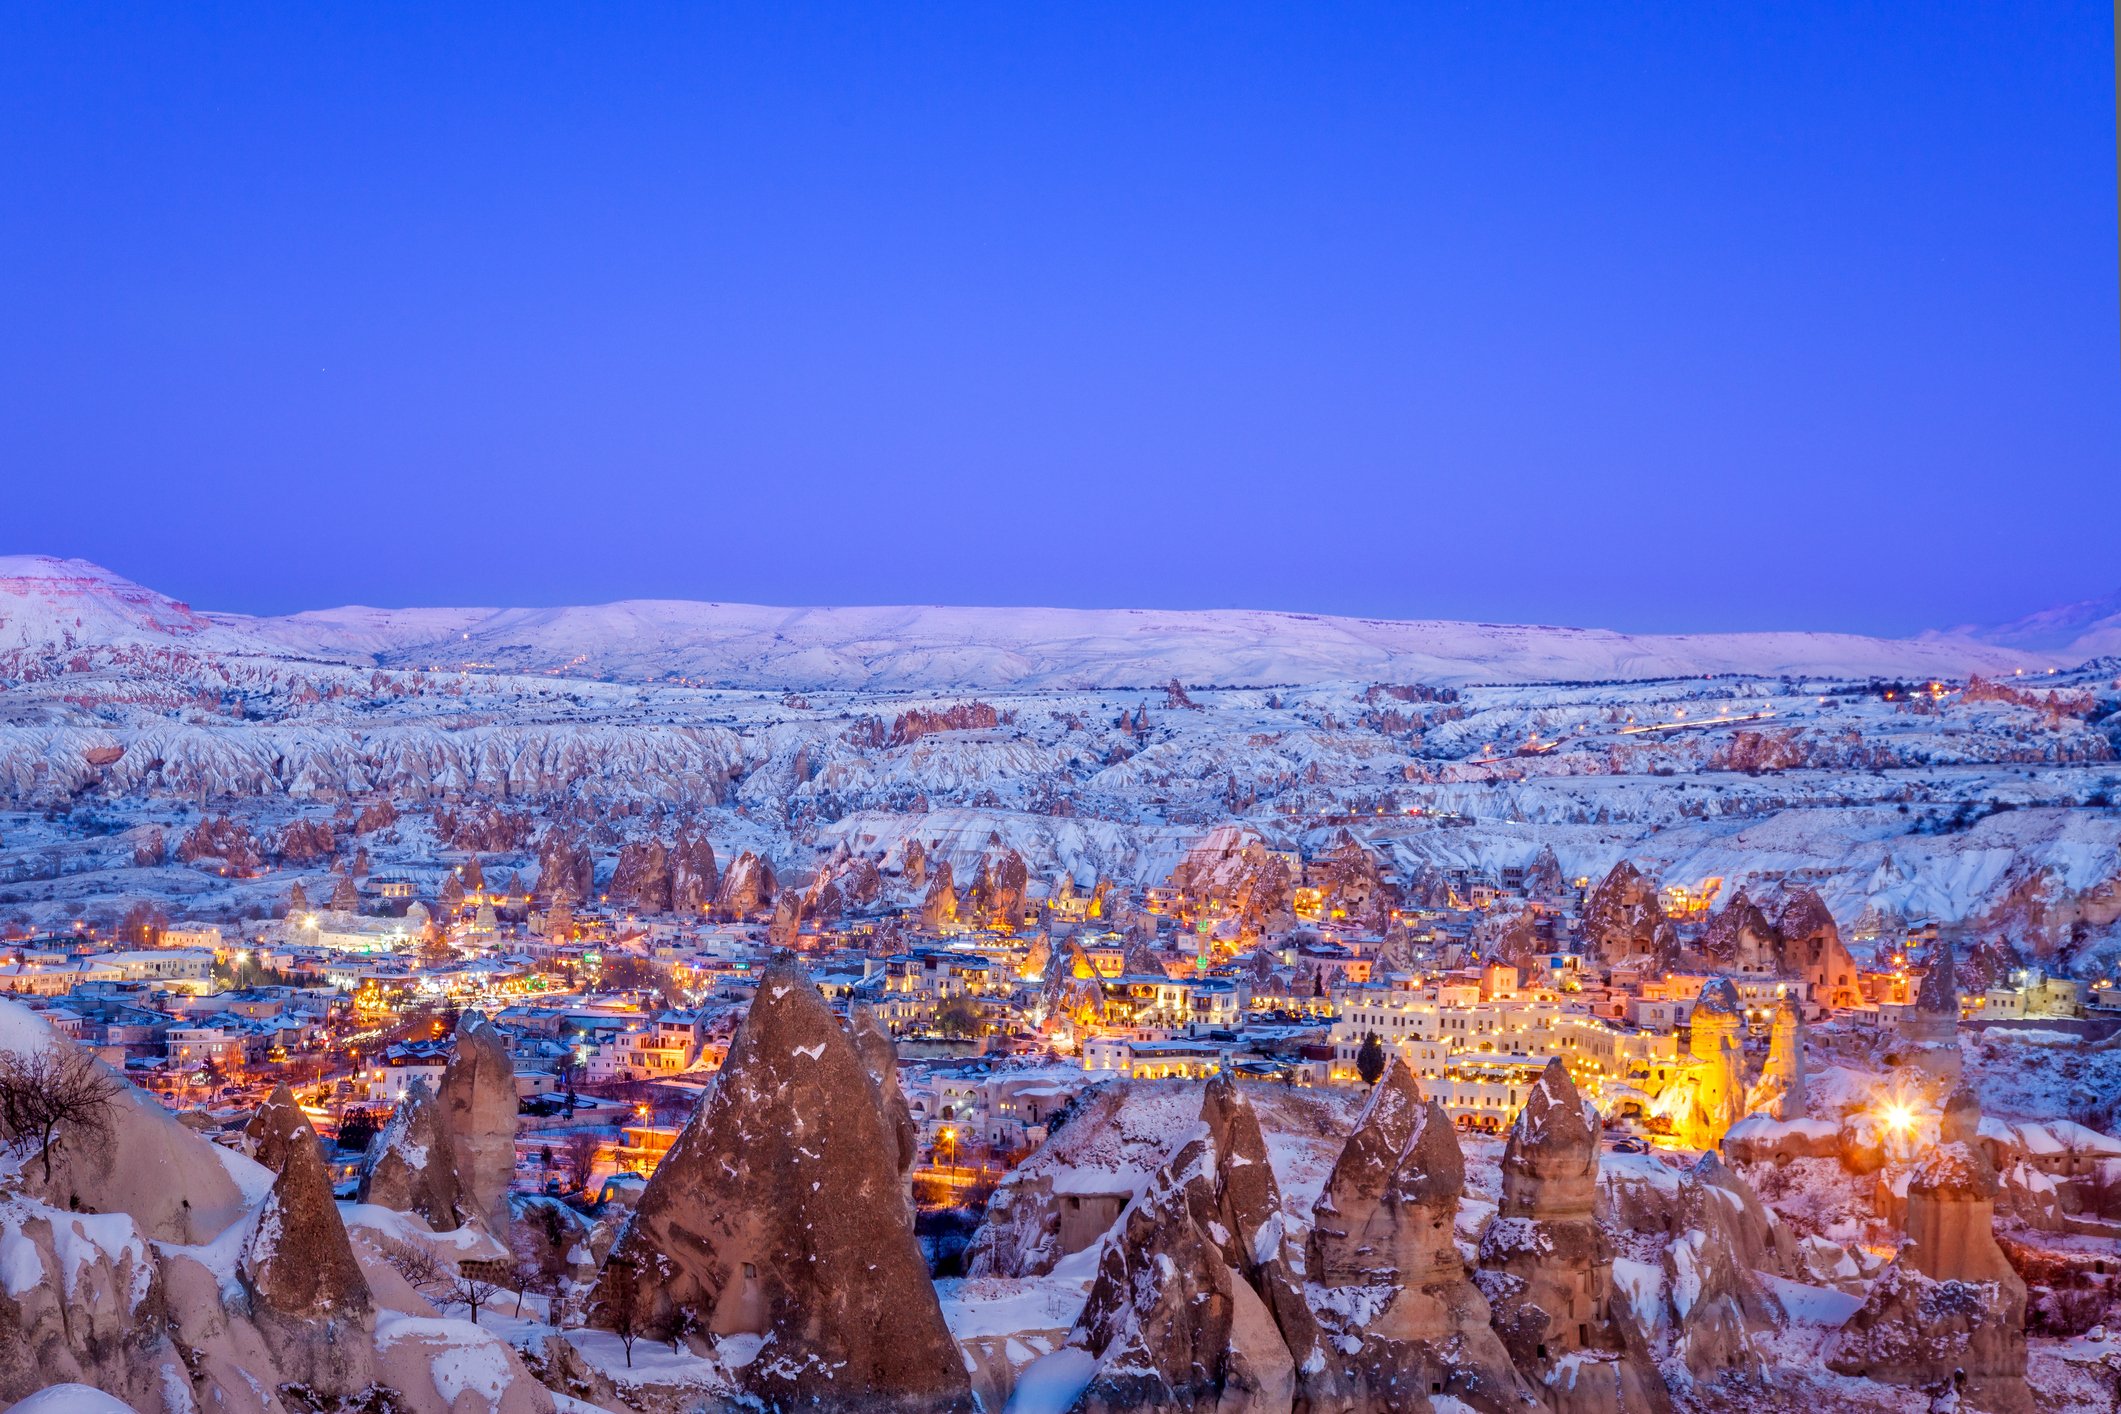 Cappadocia also looks magical under a blanket of snow in the winter. (iStock Photo)